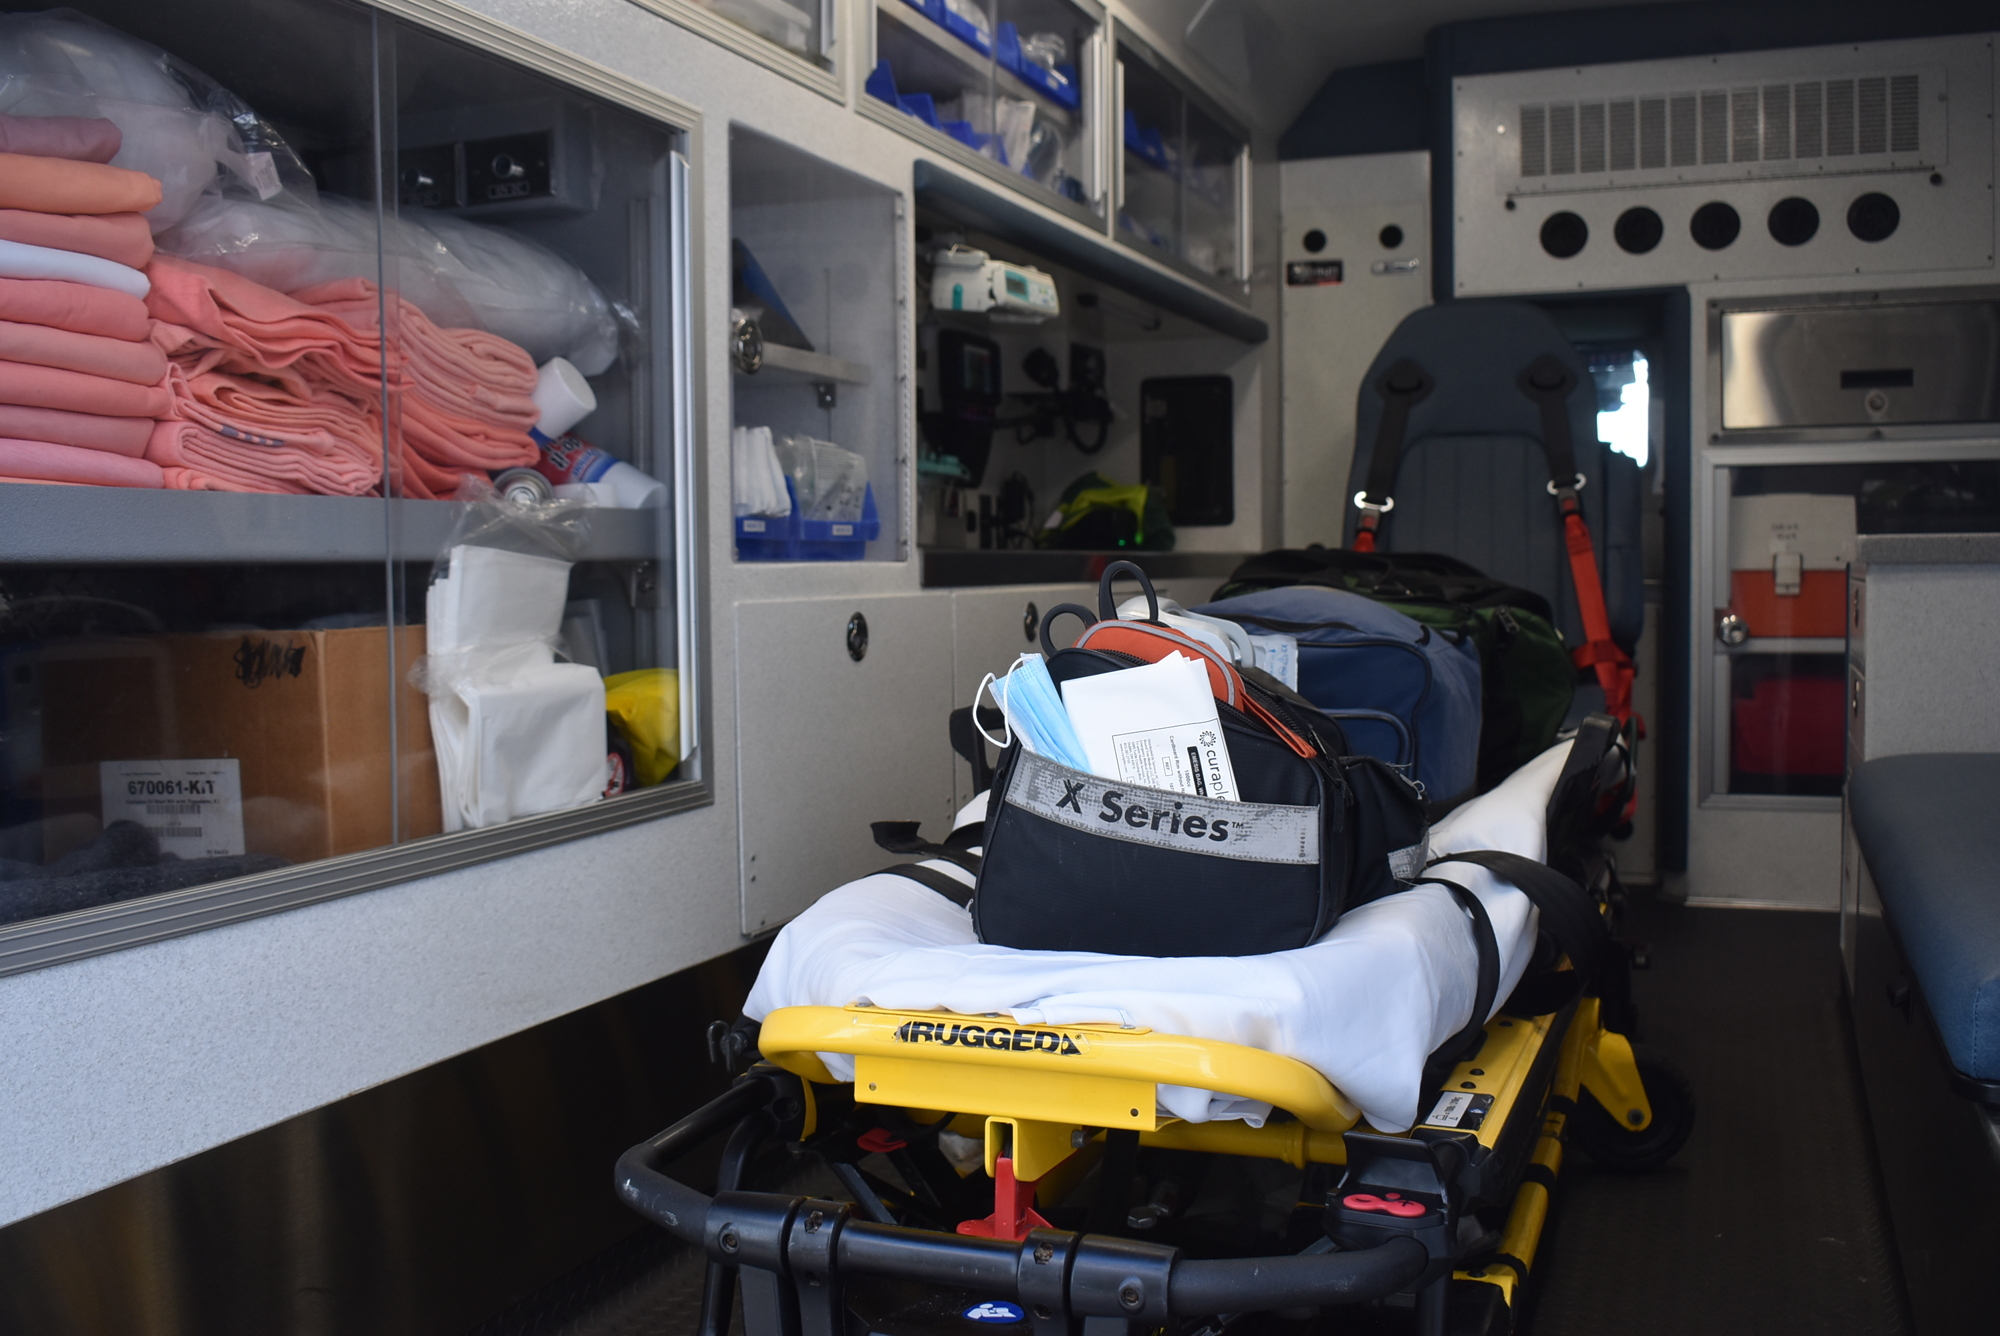 Manatee County is purchasing two new Braun Super Chief ambulances in October. Manatee County now has 21 ambulances in its fleet.